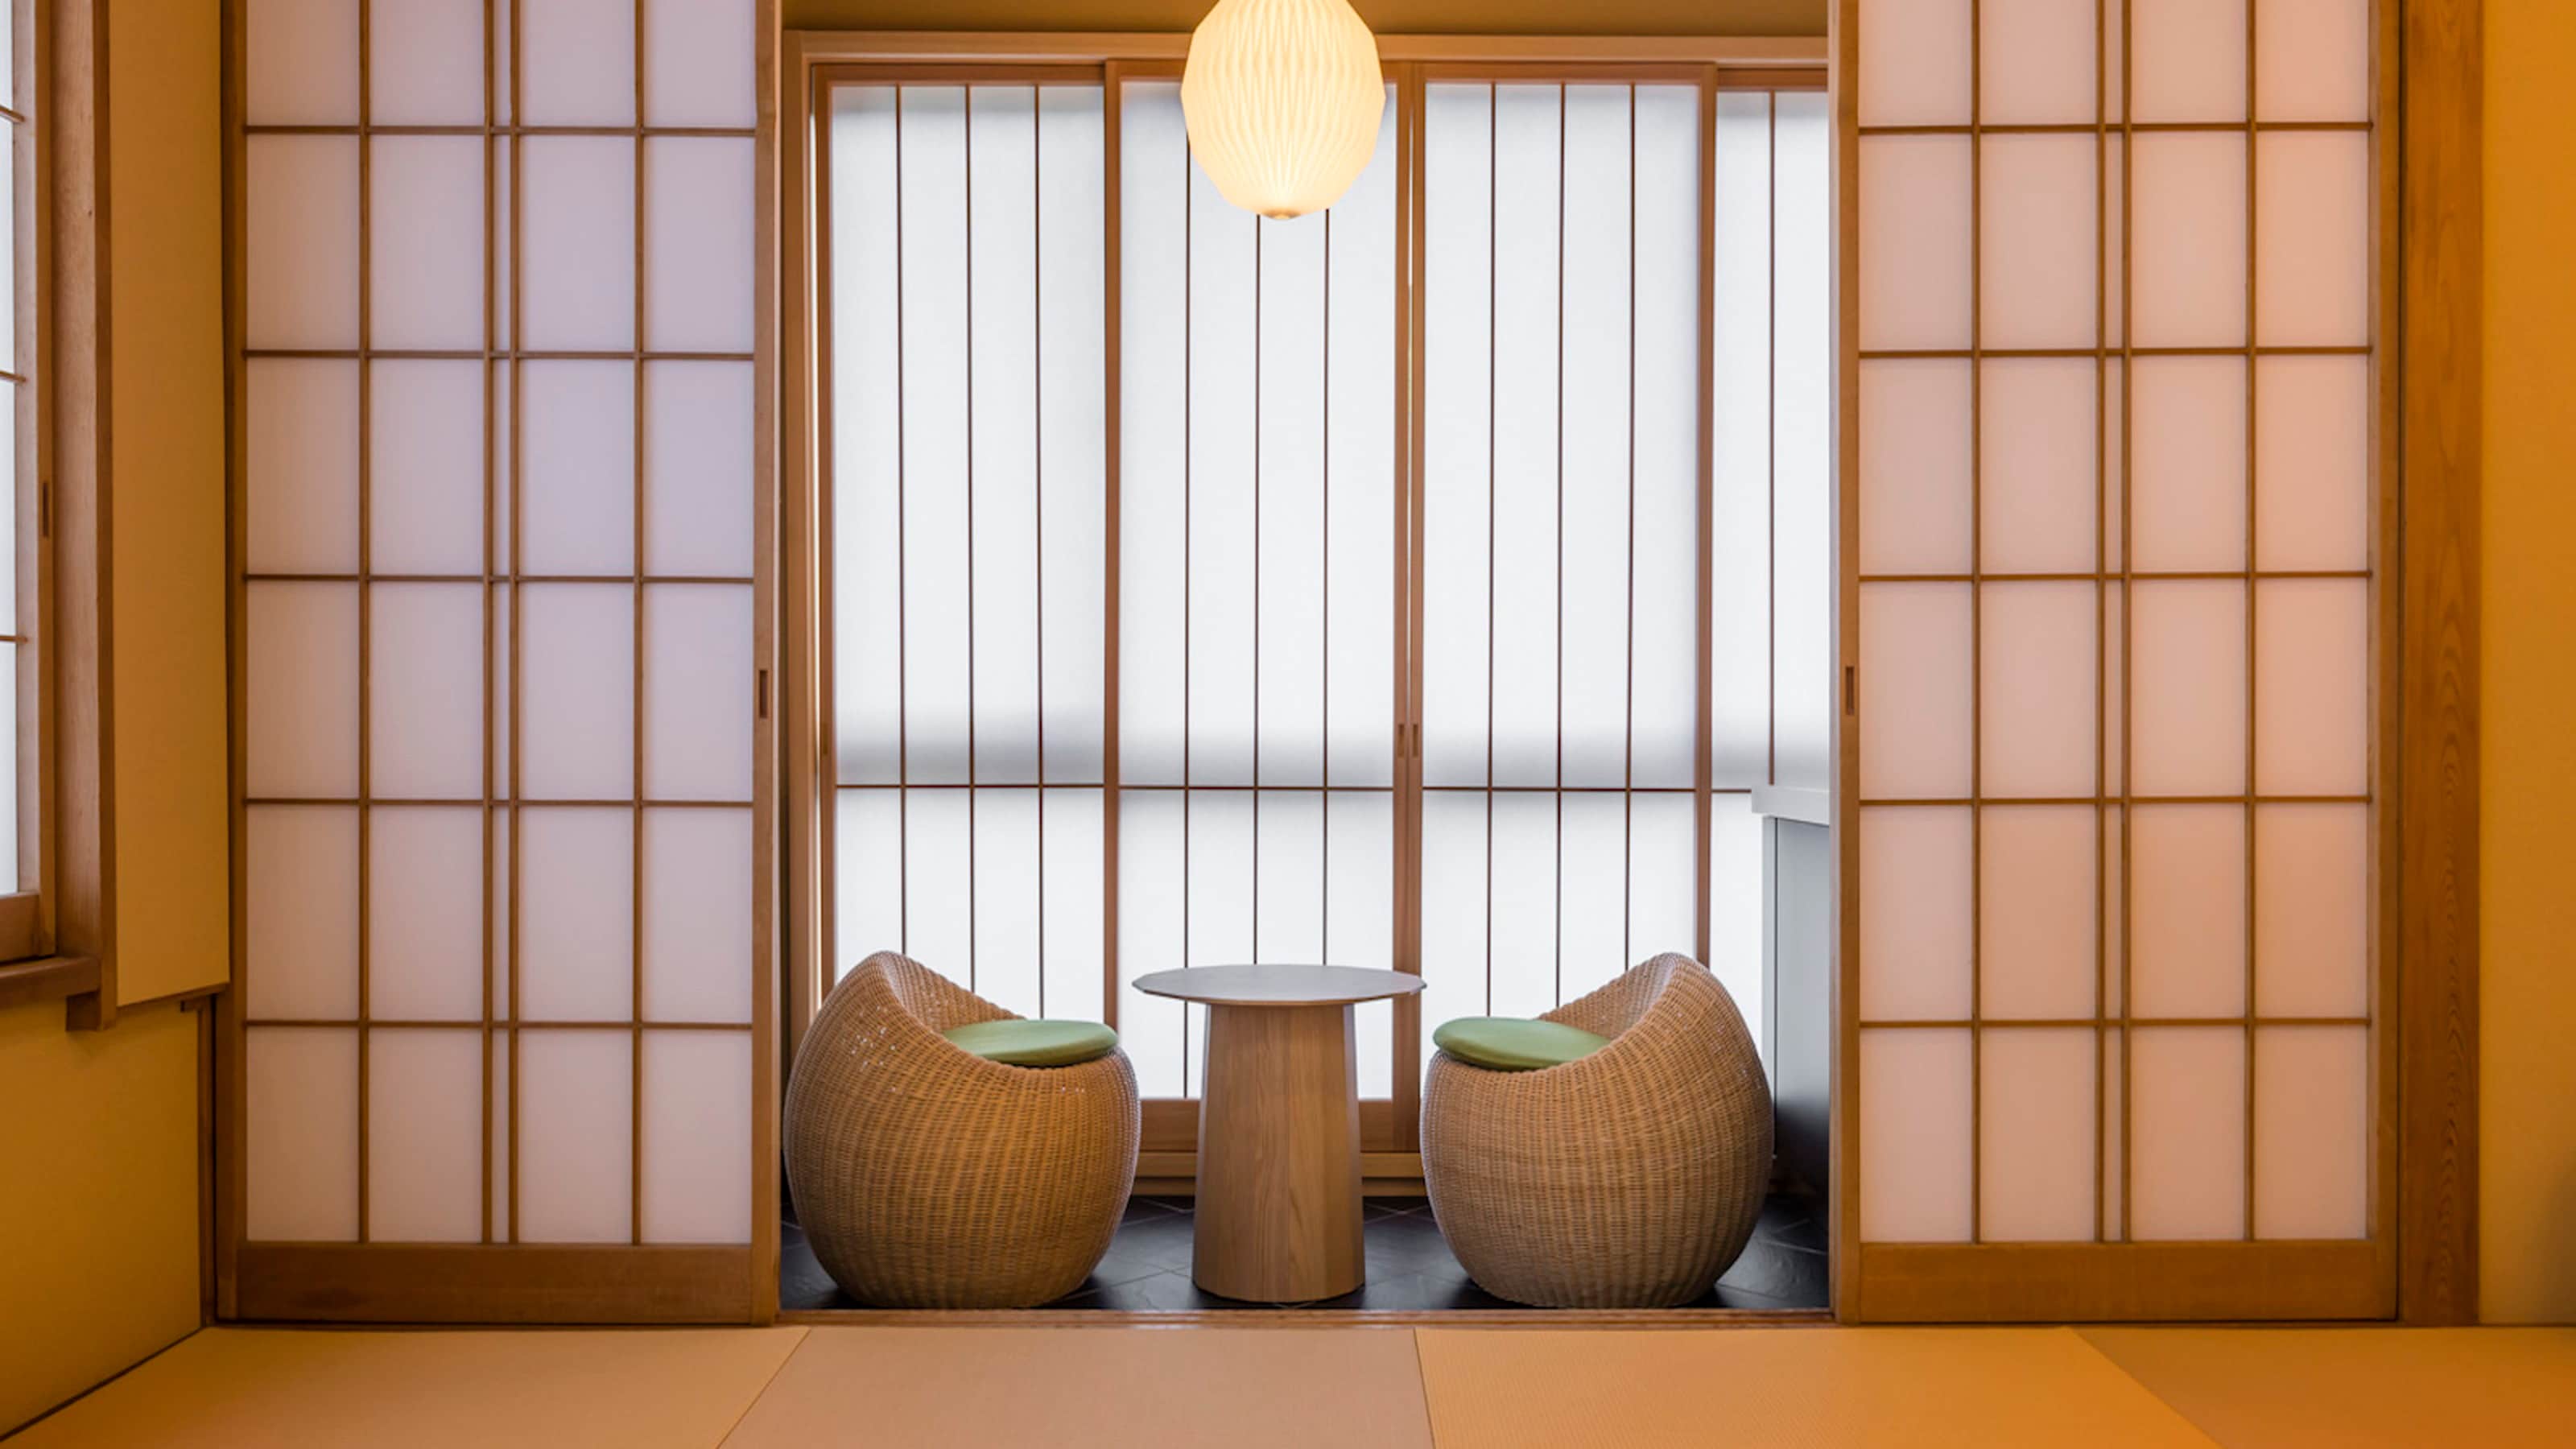 [Large type with free-flowing hot spring cypress semi-open-air bath] Japanese-style room 10 tatami mats